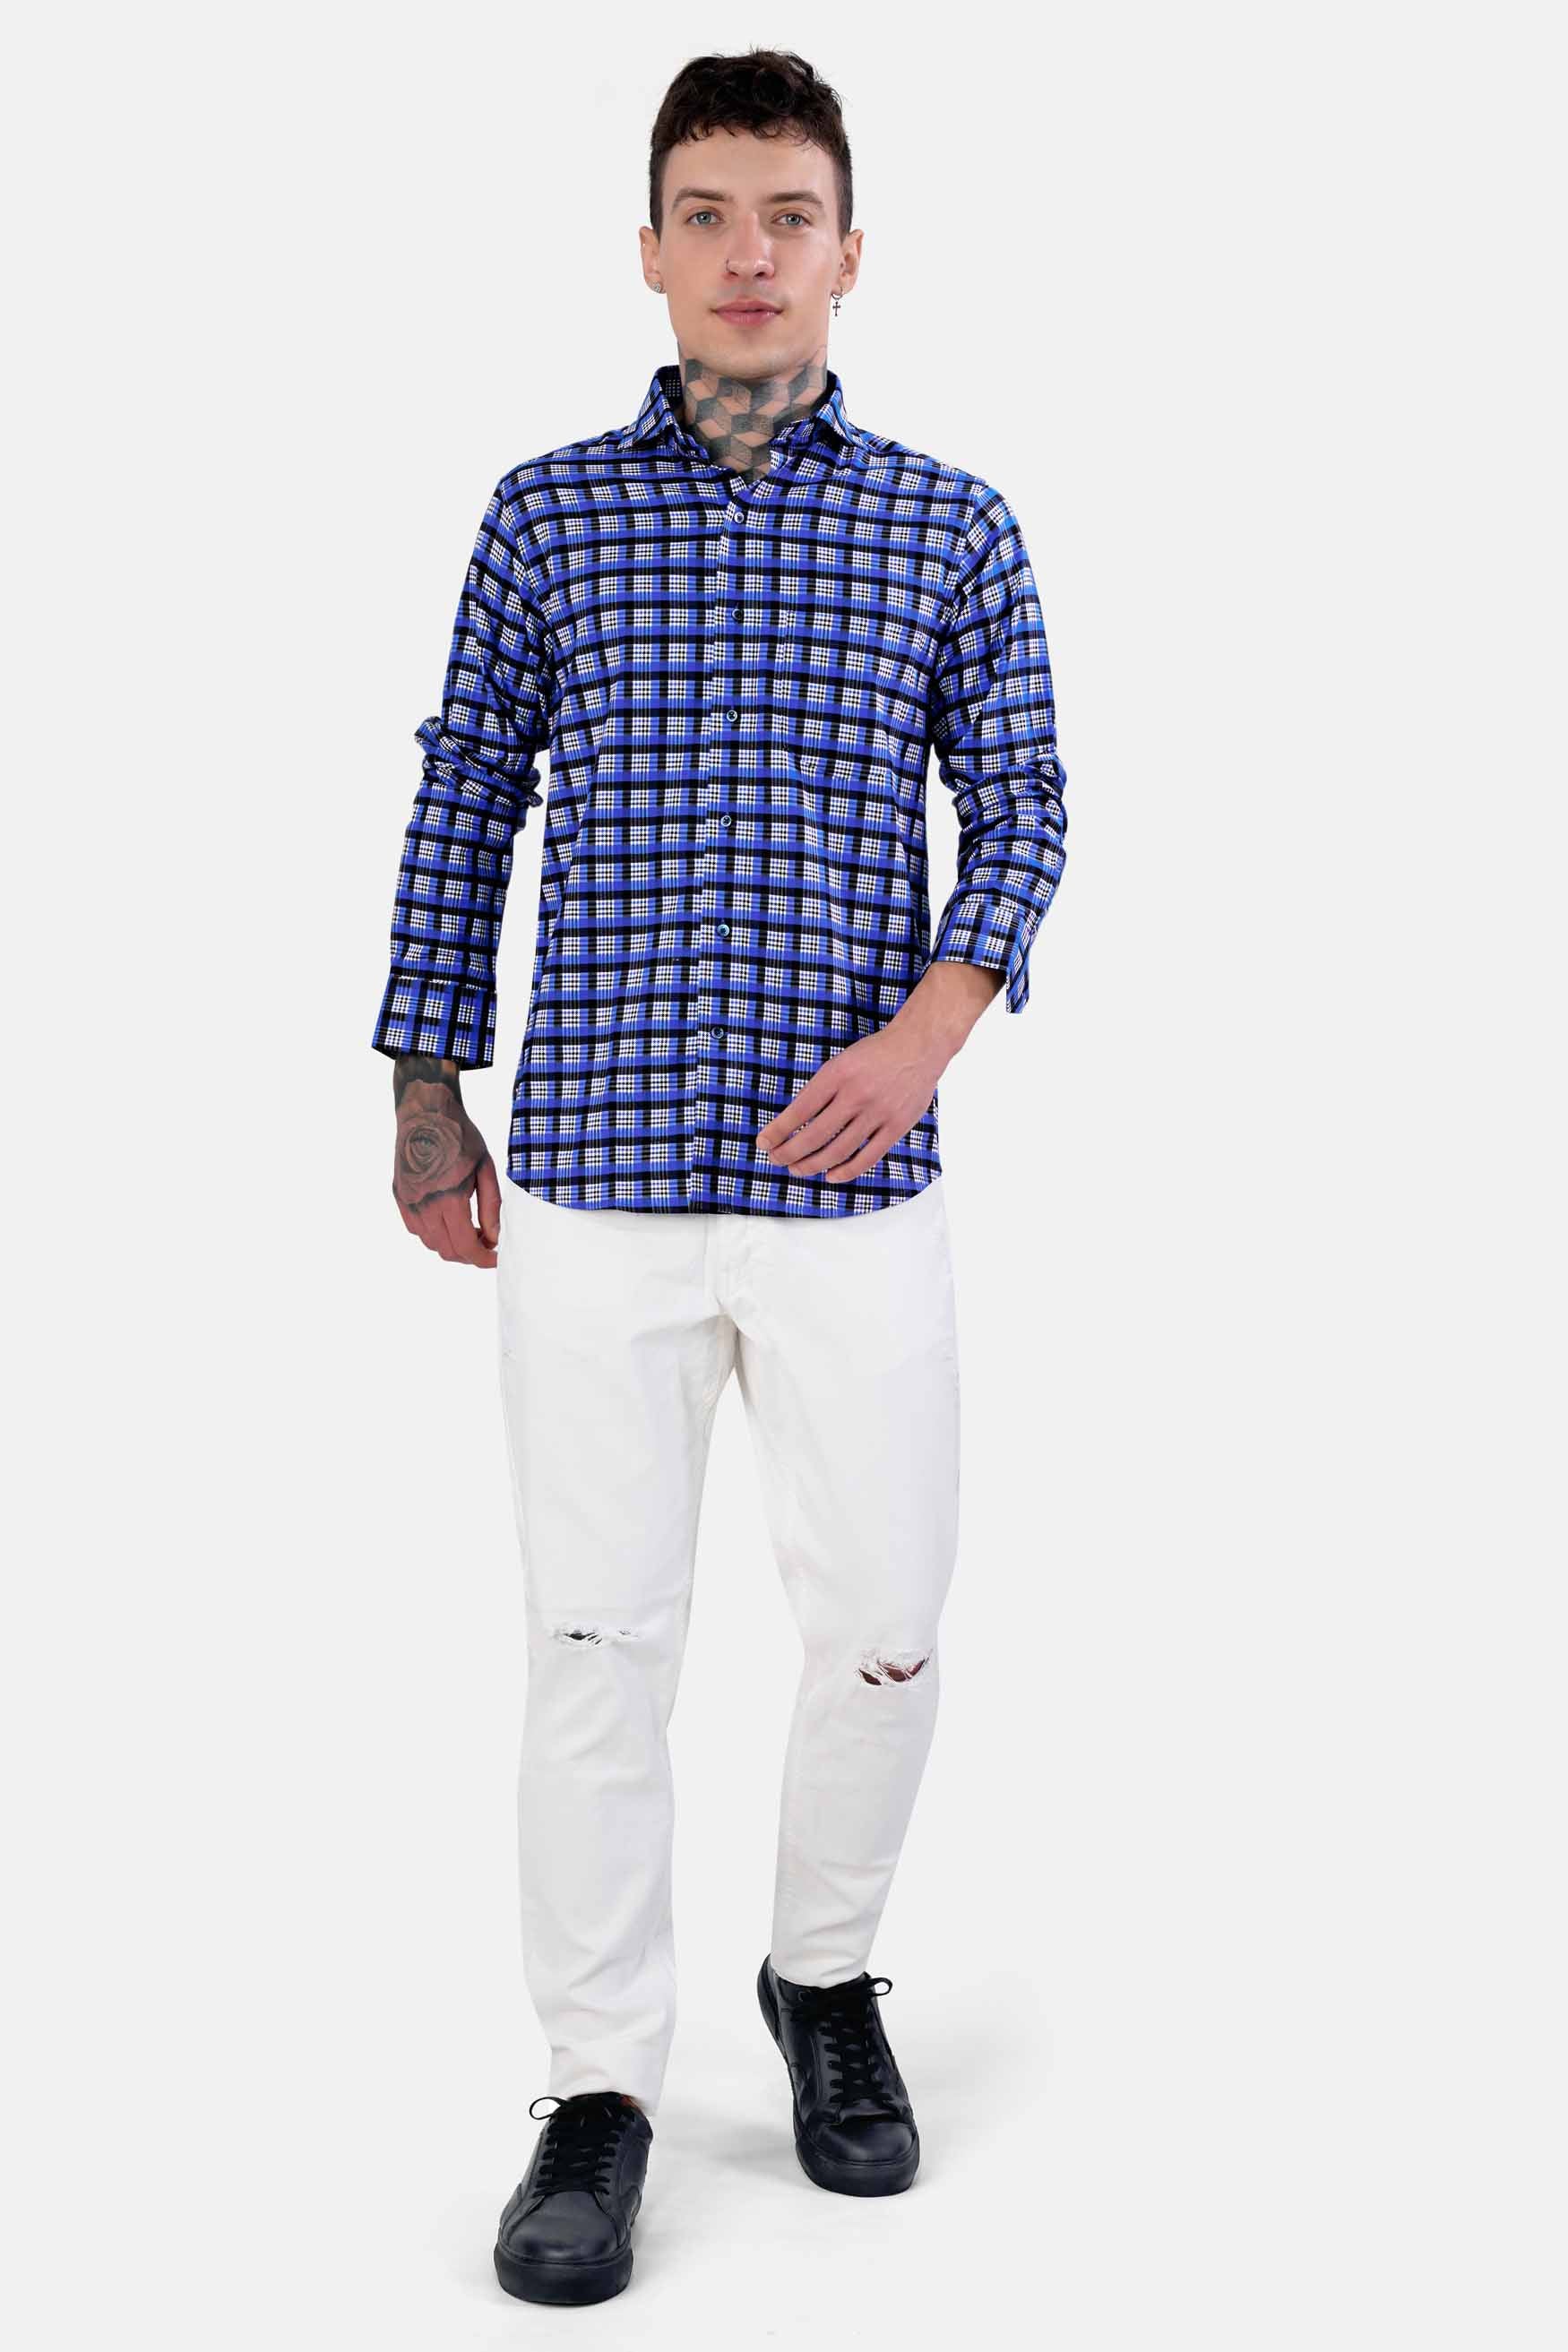 Azul Blue with White and Black Checkered Houndstooth Shirt